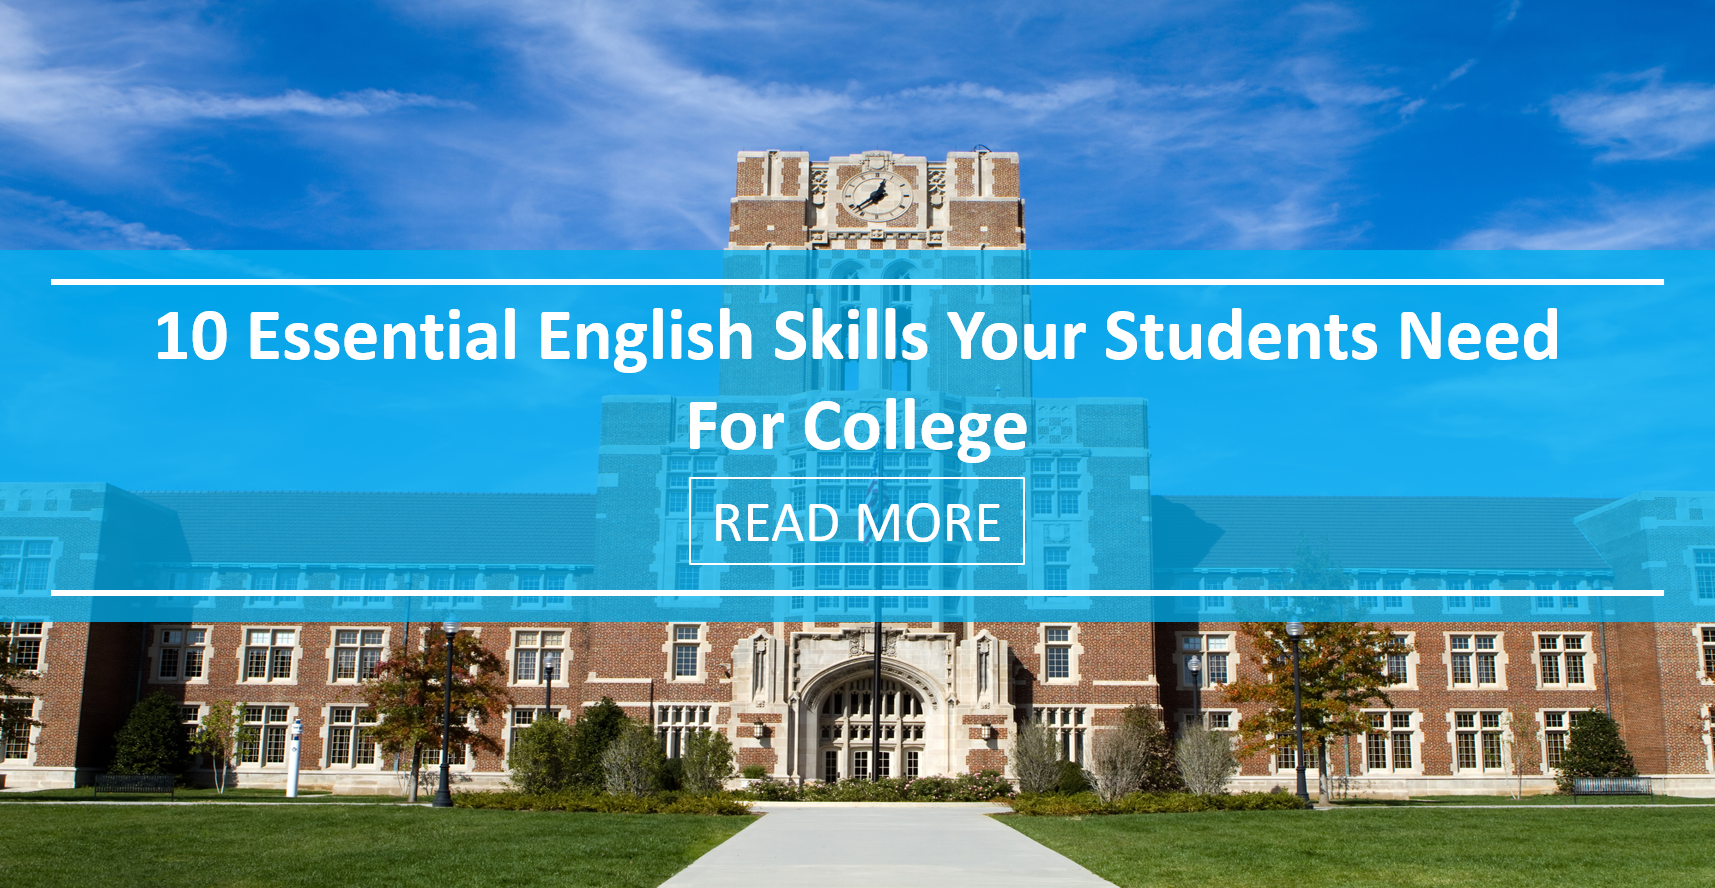 10 Essential English Skills Your Students Need for College